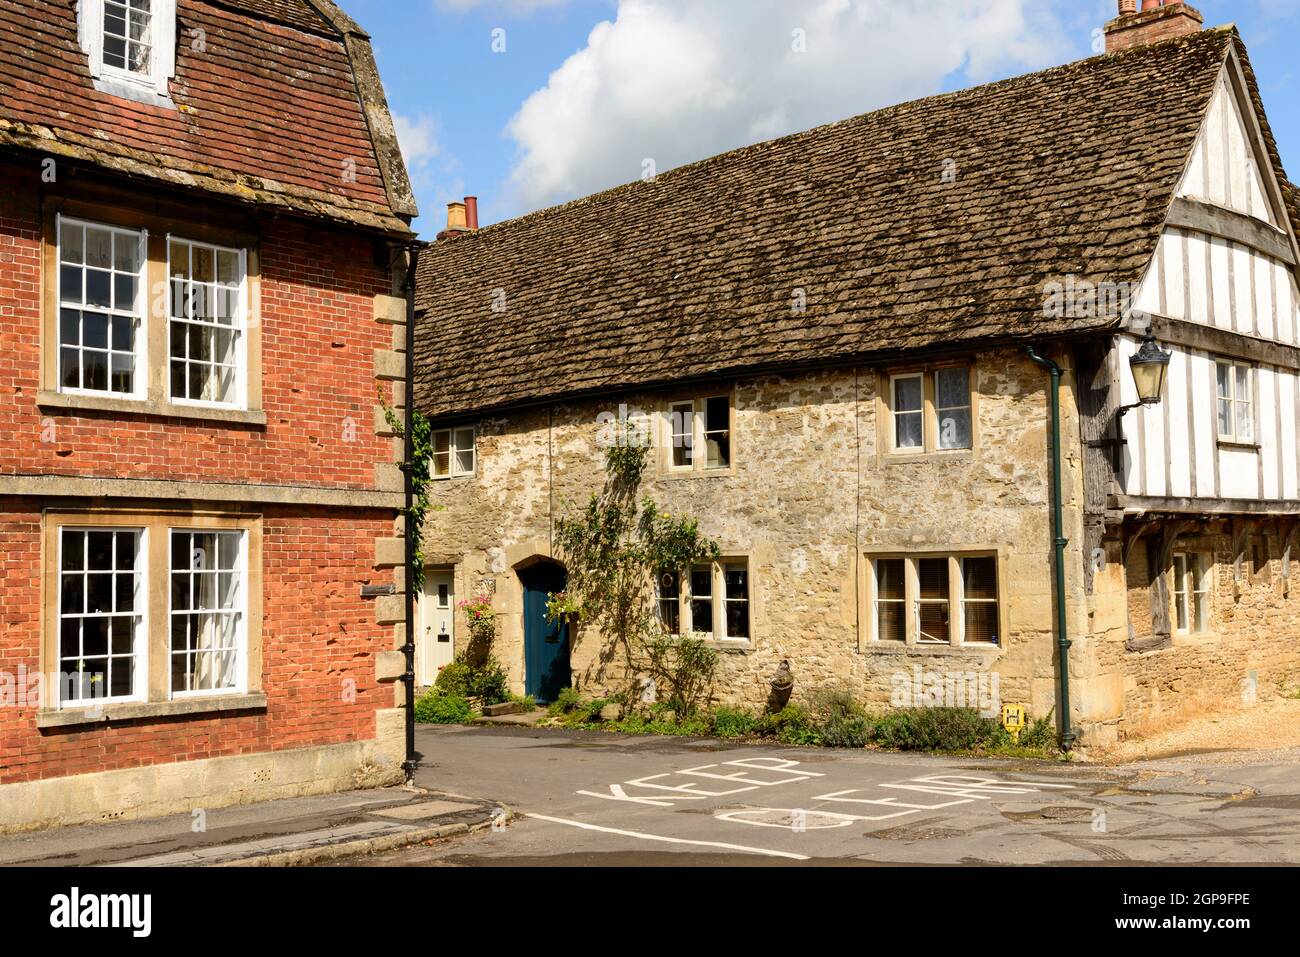 detail of medieval cottages built in brick, stone and wattle, prospecting on a street in historic touristic village of  Wiltshire Stock Photo